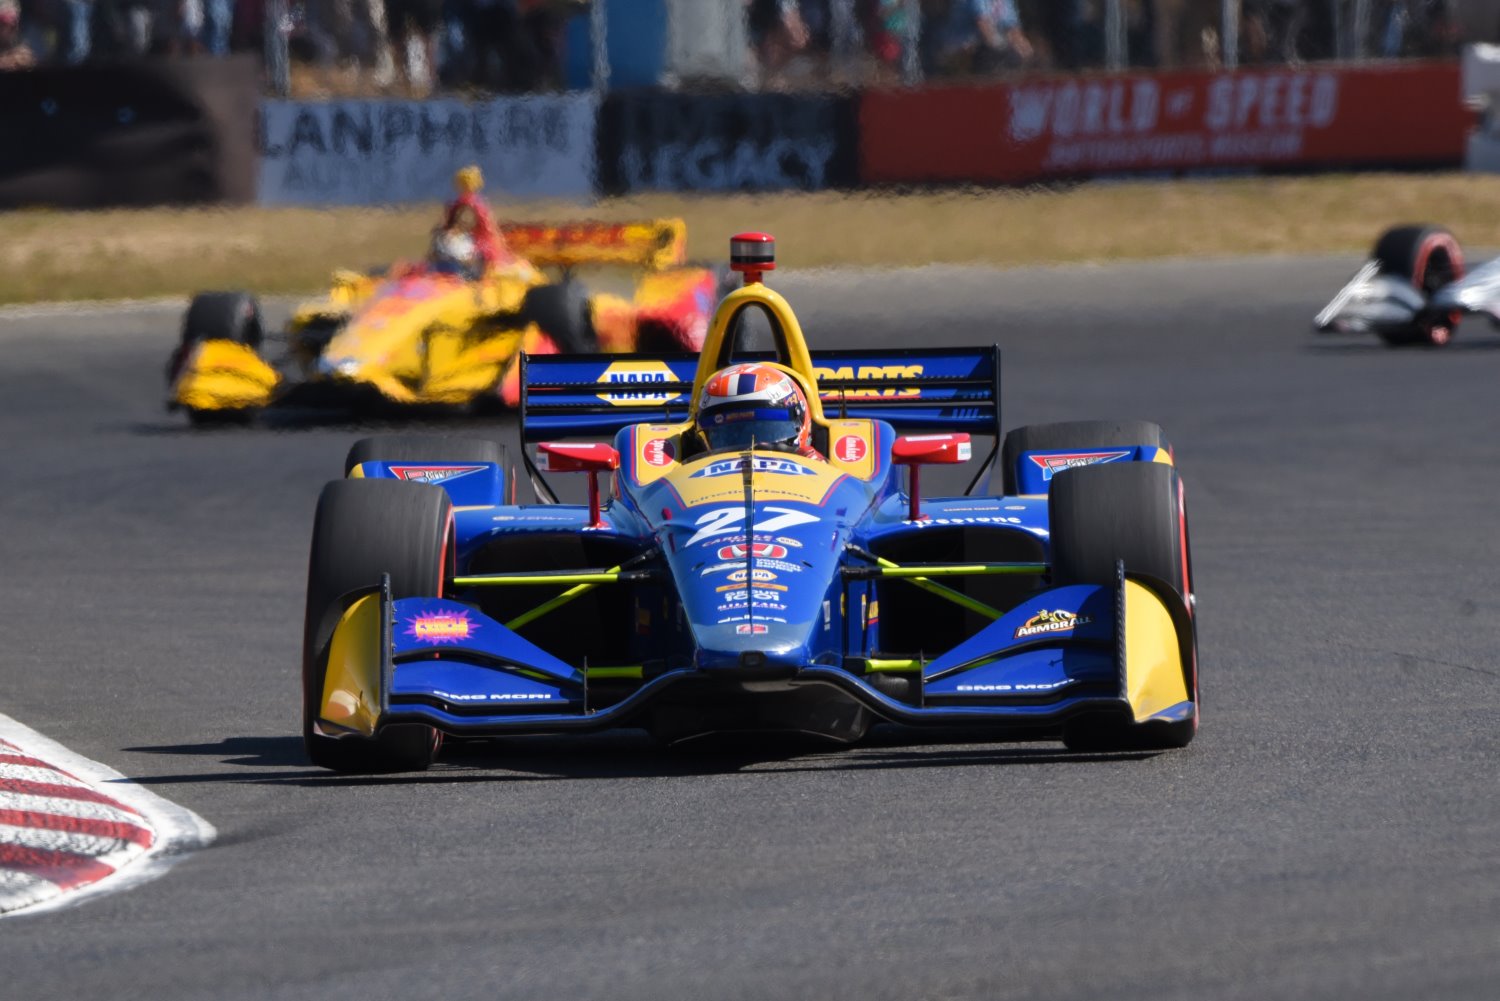 Rossi was fastest last year but got the IndyCar closed-pits screw